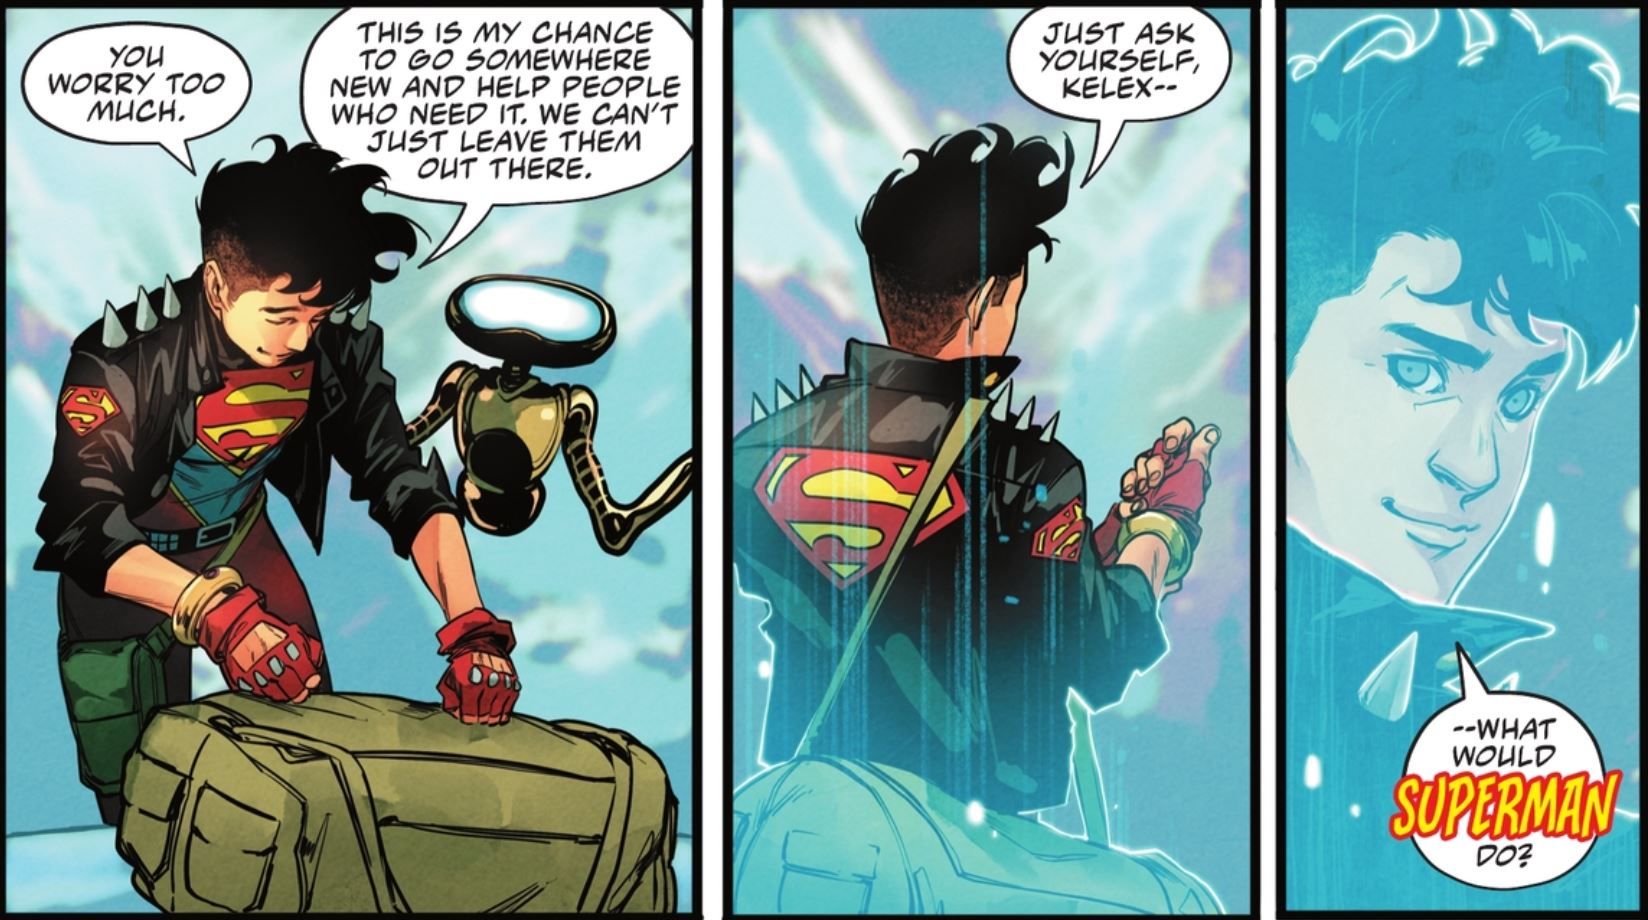 “Ripping Me Apart Piece by Piece”: Superboy’s Worst Fear Reinvents a Terrifying Superman Villain